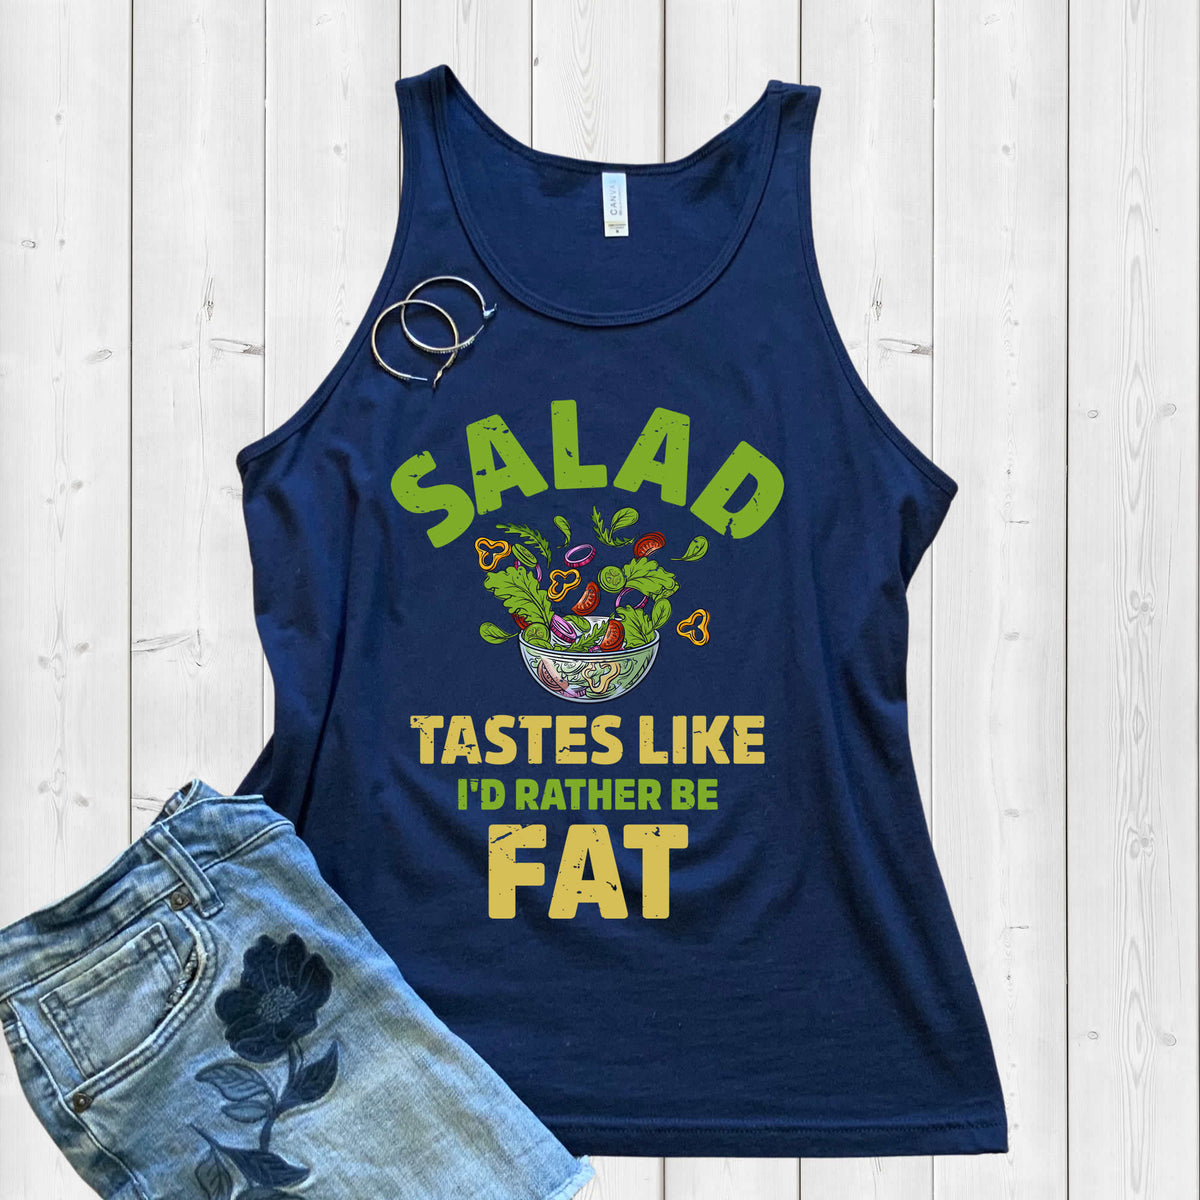 I'd Rather Be Fat Funny Salad Diet Shirt | Anti Diet Culture Gift | Unisex Jersey Tank Top